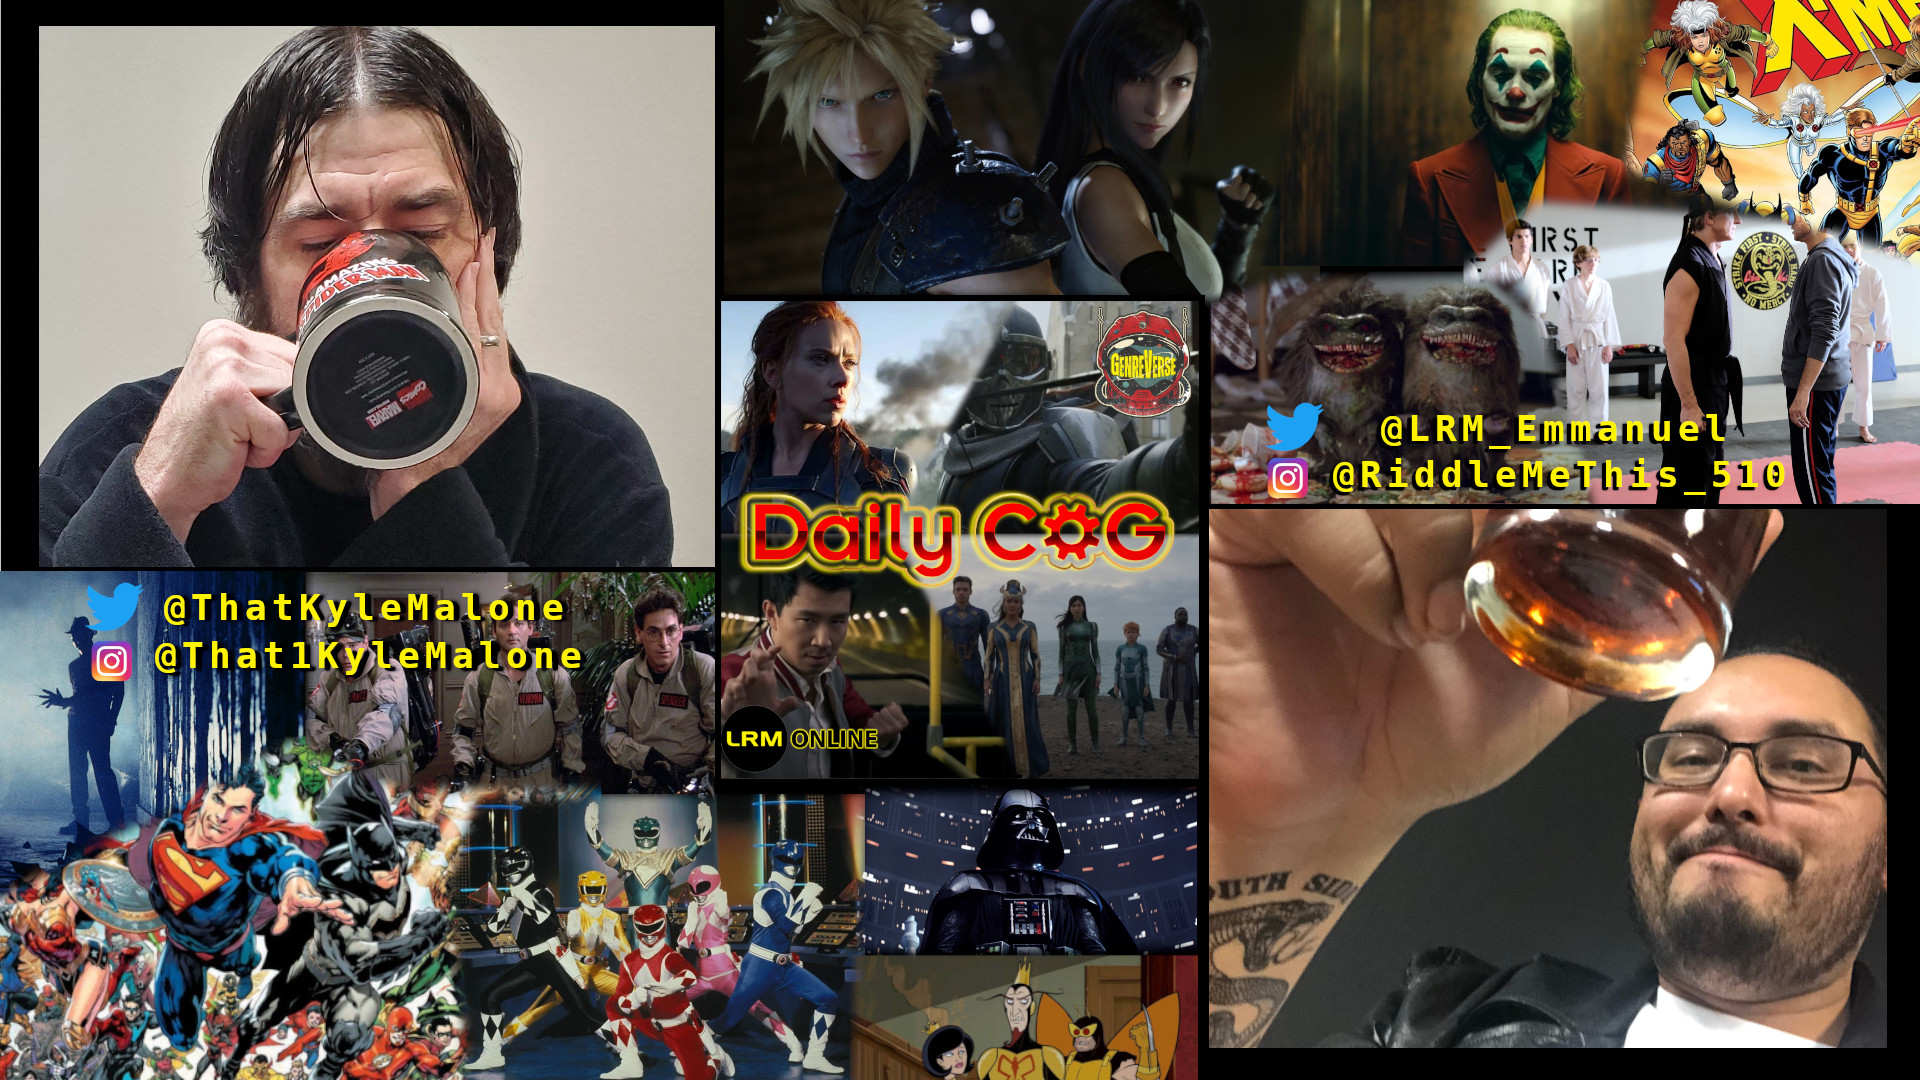 Black Widow Reaction spoiler free, worries about the MCU Shang-Chi and The Eternals, & Politics ruining escapism the daily COG daily cup of genre 6-18-21